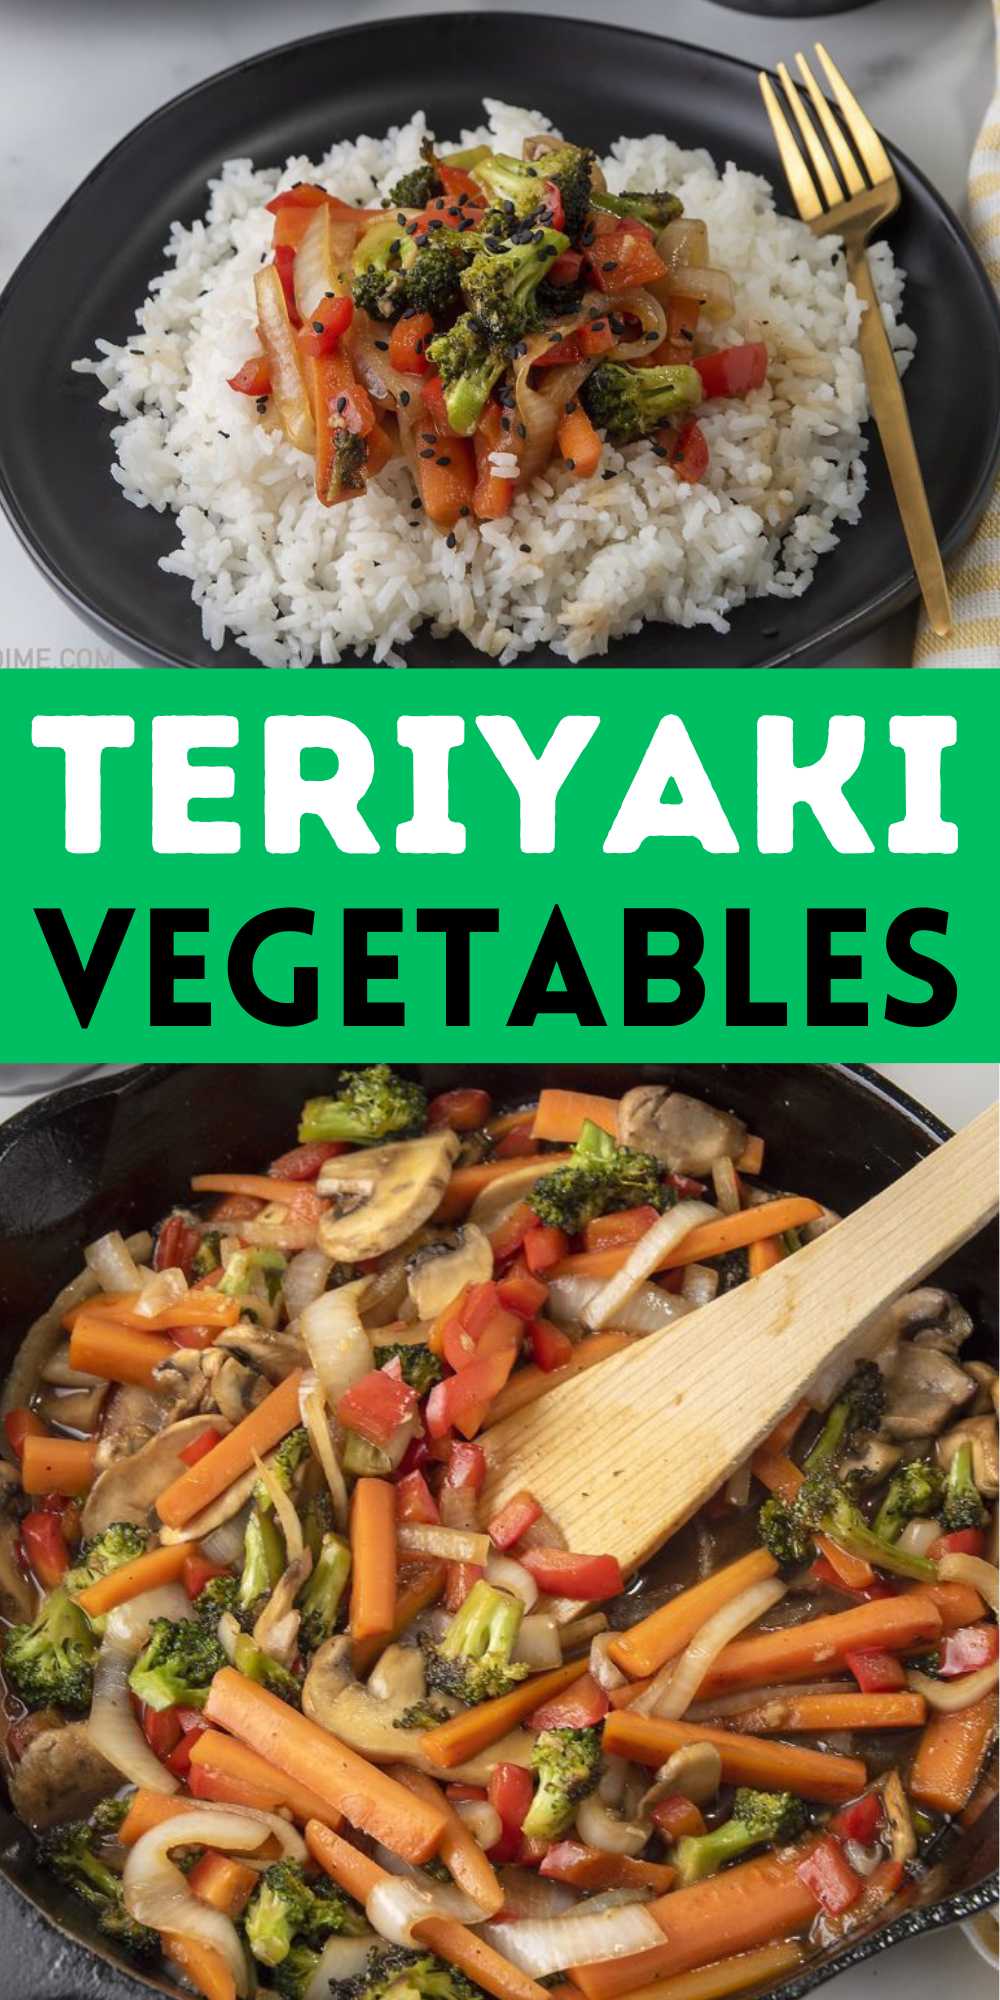 Teriyaki Vegetables is the perfect meal to serve with your grilled meats. It tastes amazing, full of flavor and made with simple ingredients. If you have vegetables that need to be used, make this teriyaki vegetable recipe. It is easily ready in less than 15 minutes and always a family favorite. #eatingonadime #teriyakivegetables #teriyakirecipes